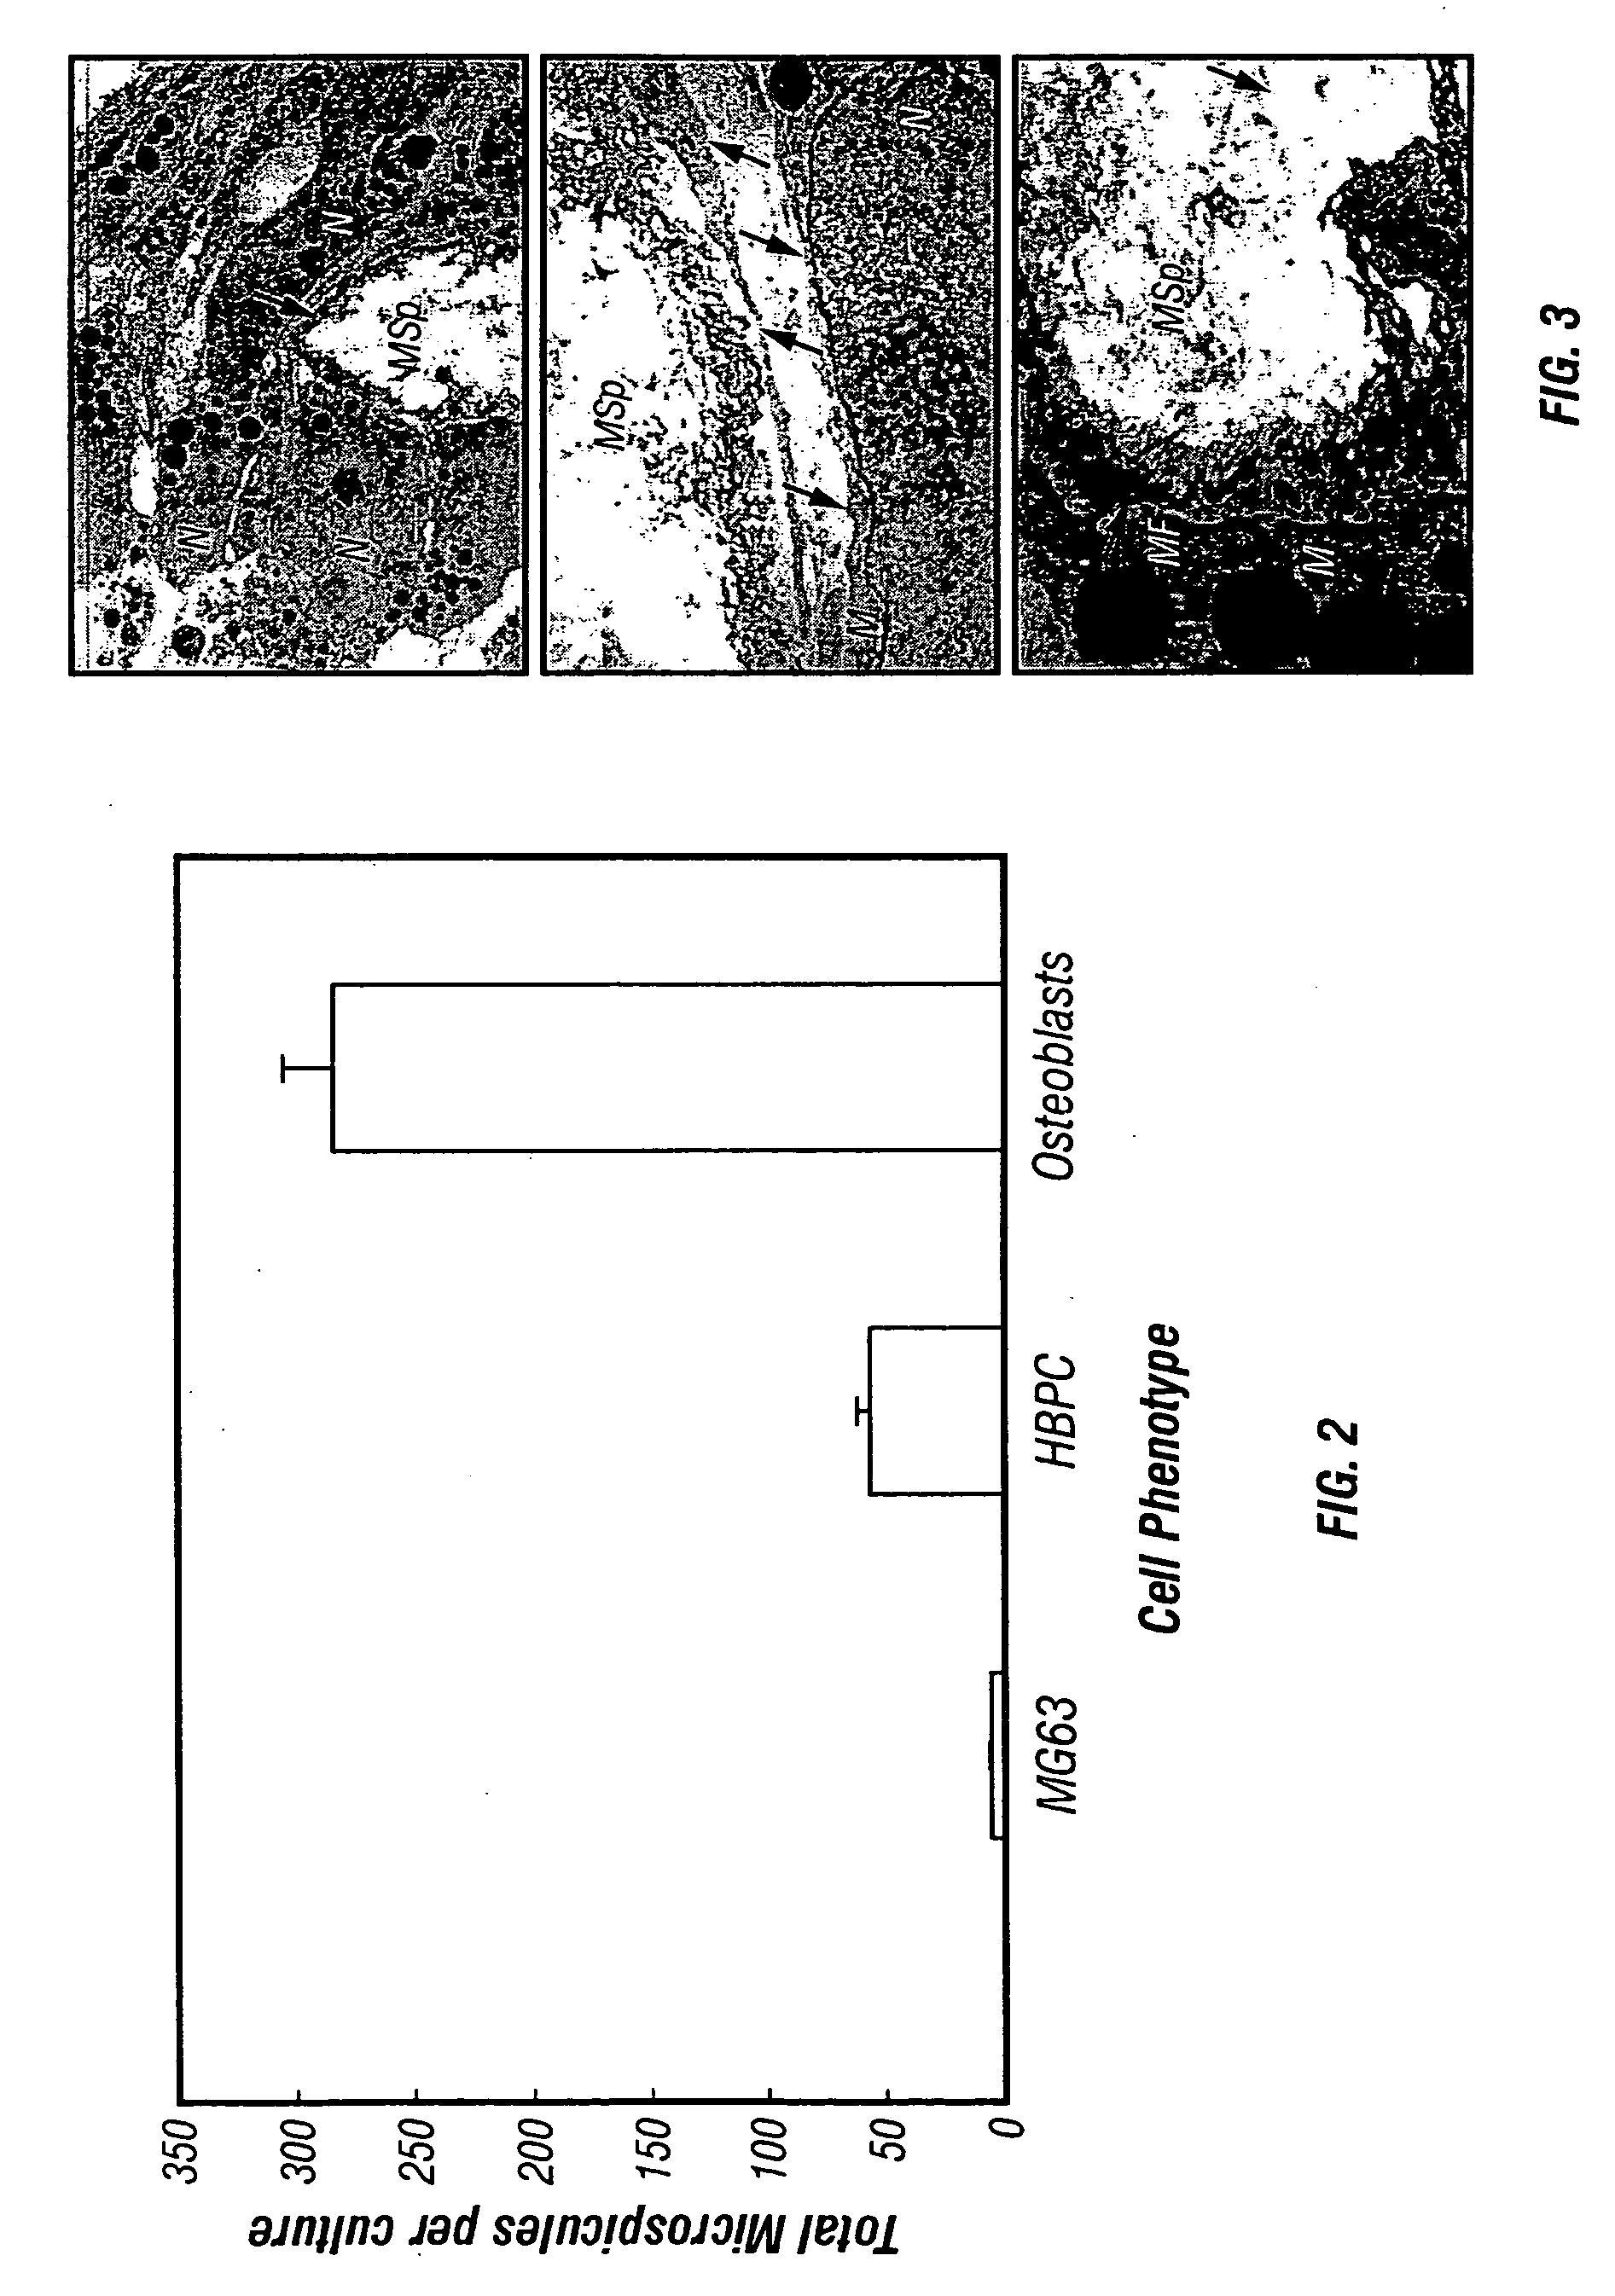 Process for ex vivo formation of mammalian bone and uses thereof